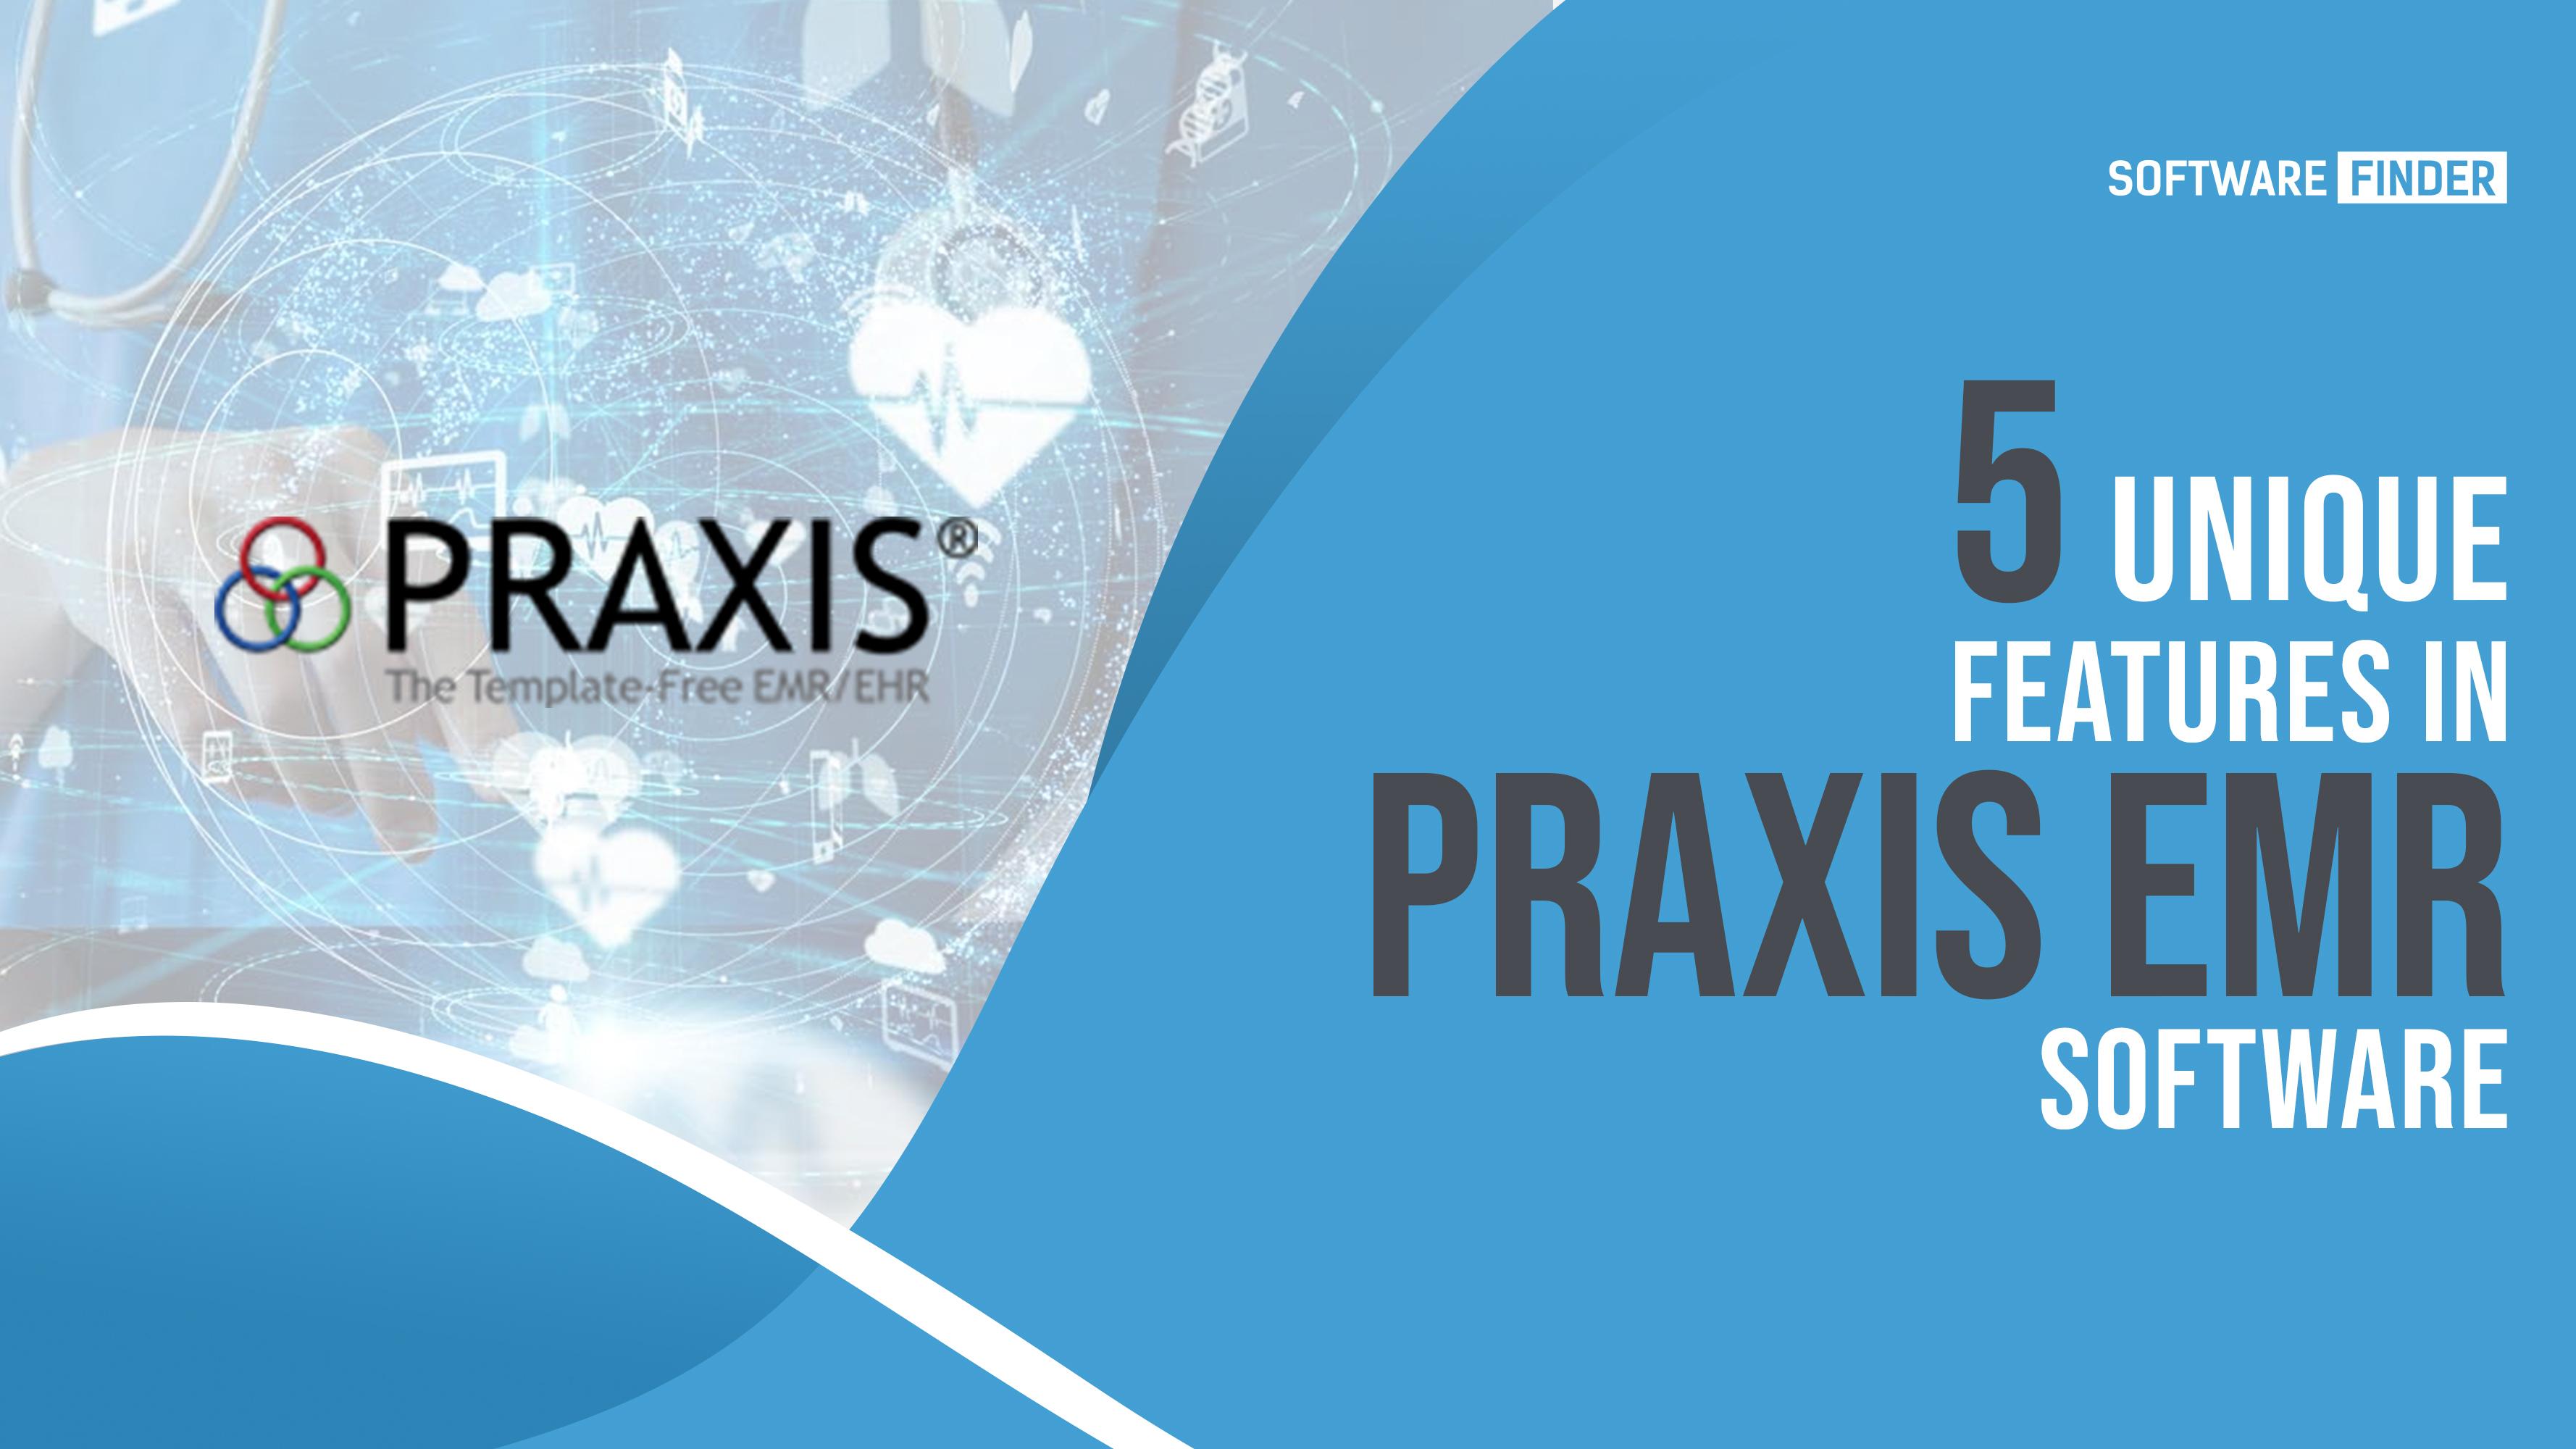 5 Unique Features in Praxis EMR Software